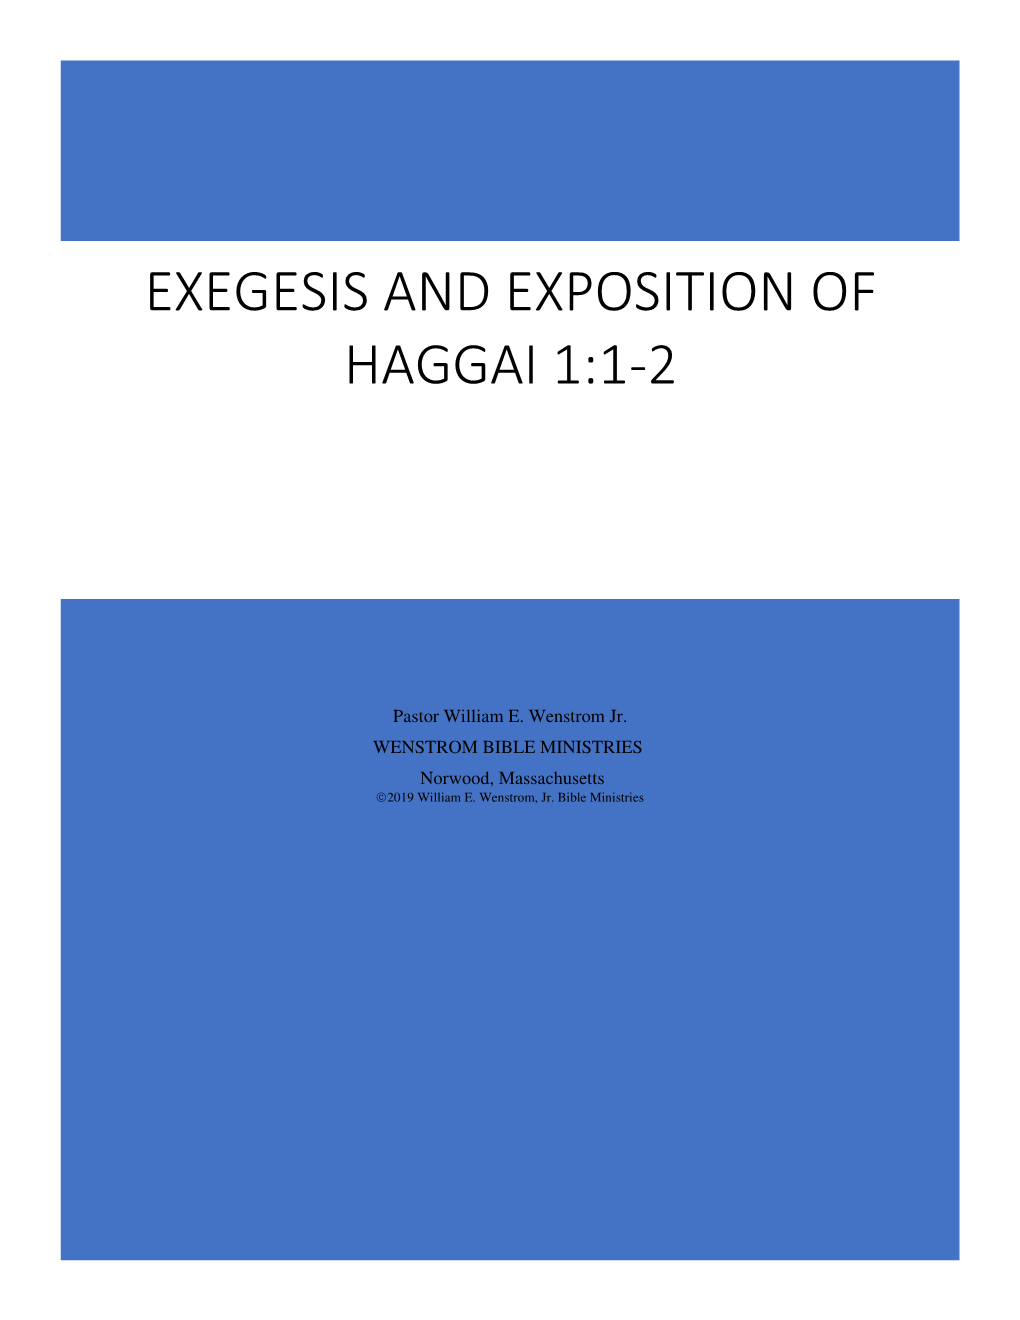 Exegesis and Exposition of Haggai 1:1-2